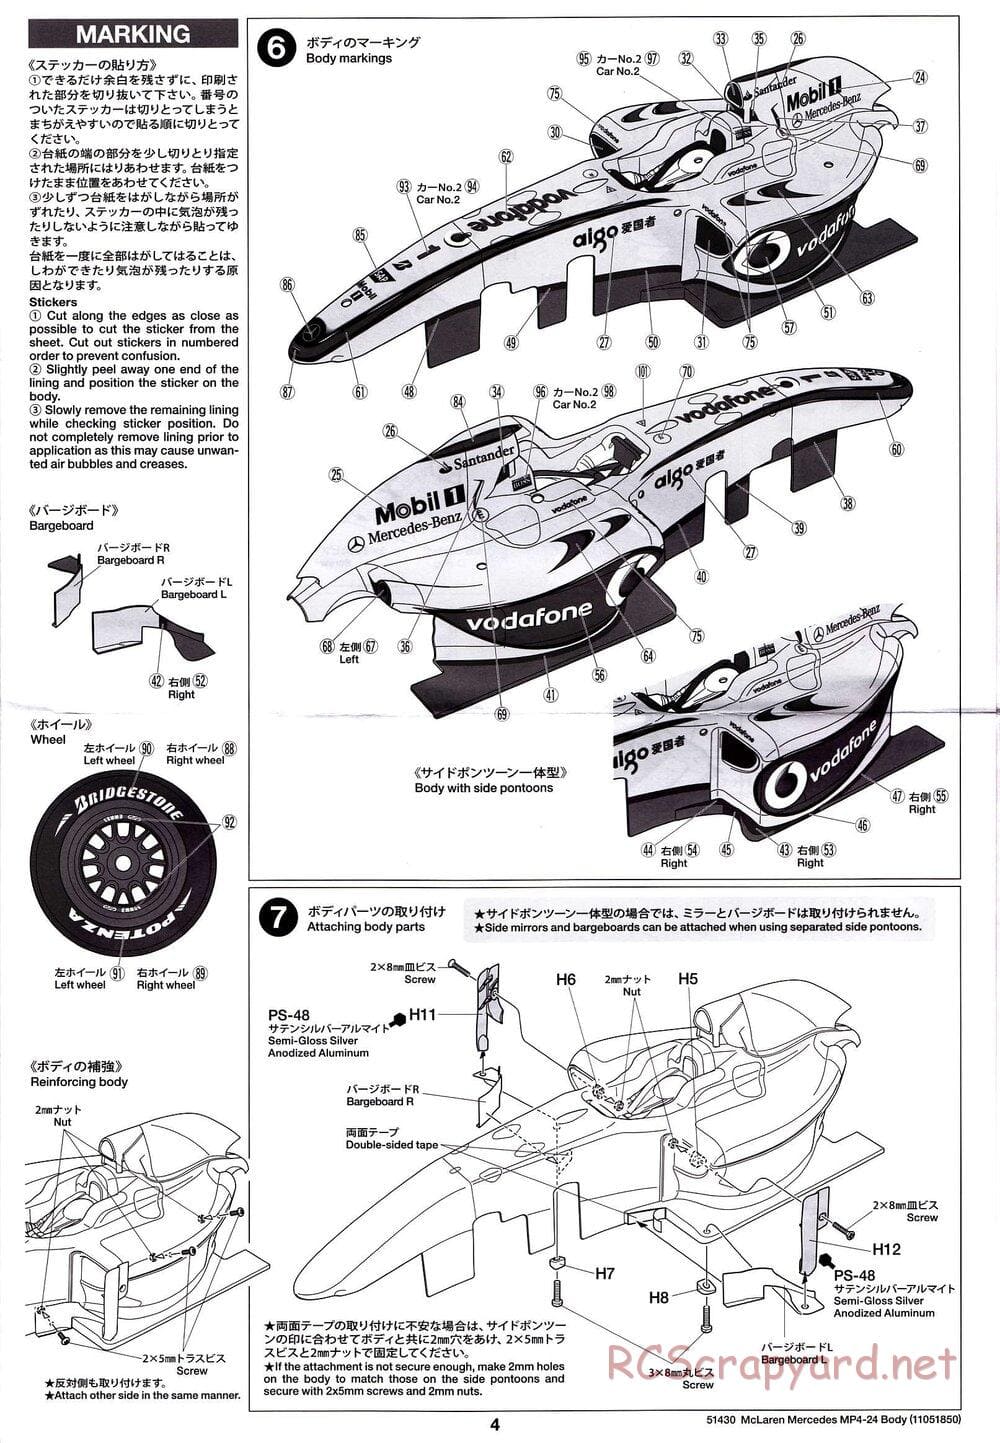 Tamiya - Vodafone McLaren Mercedes MP4-24 - F104 Chassis - Body Manual - Page 4